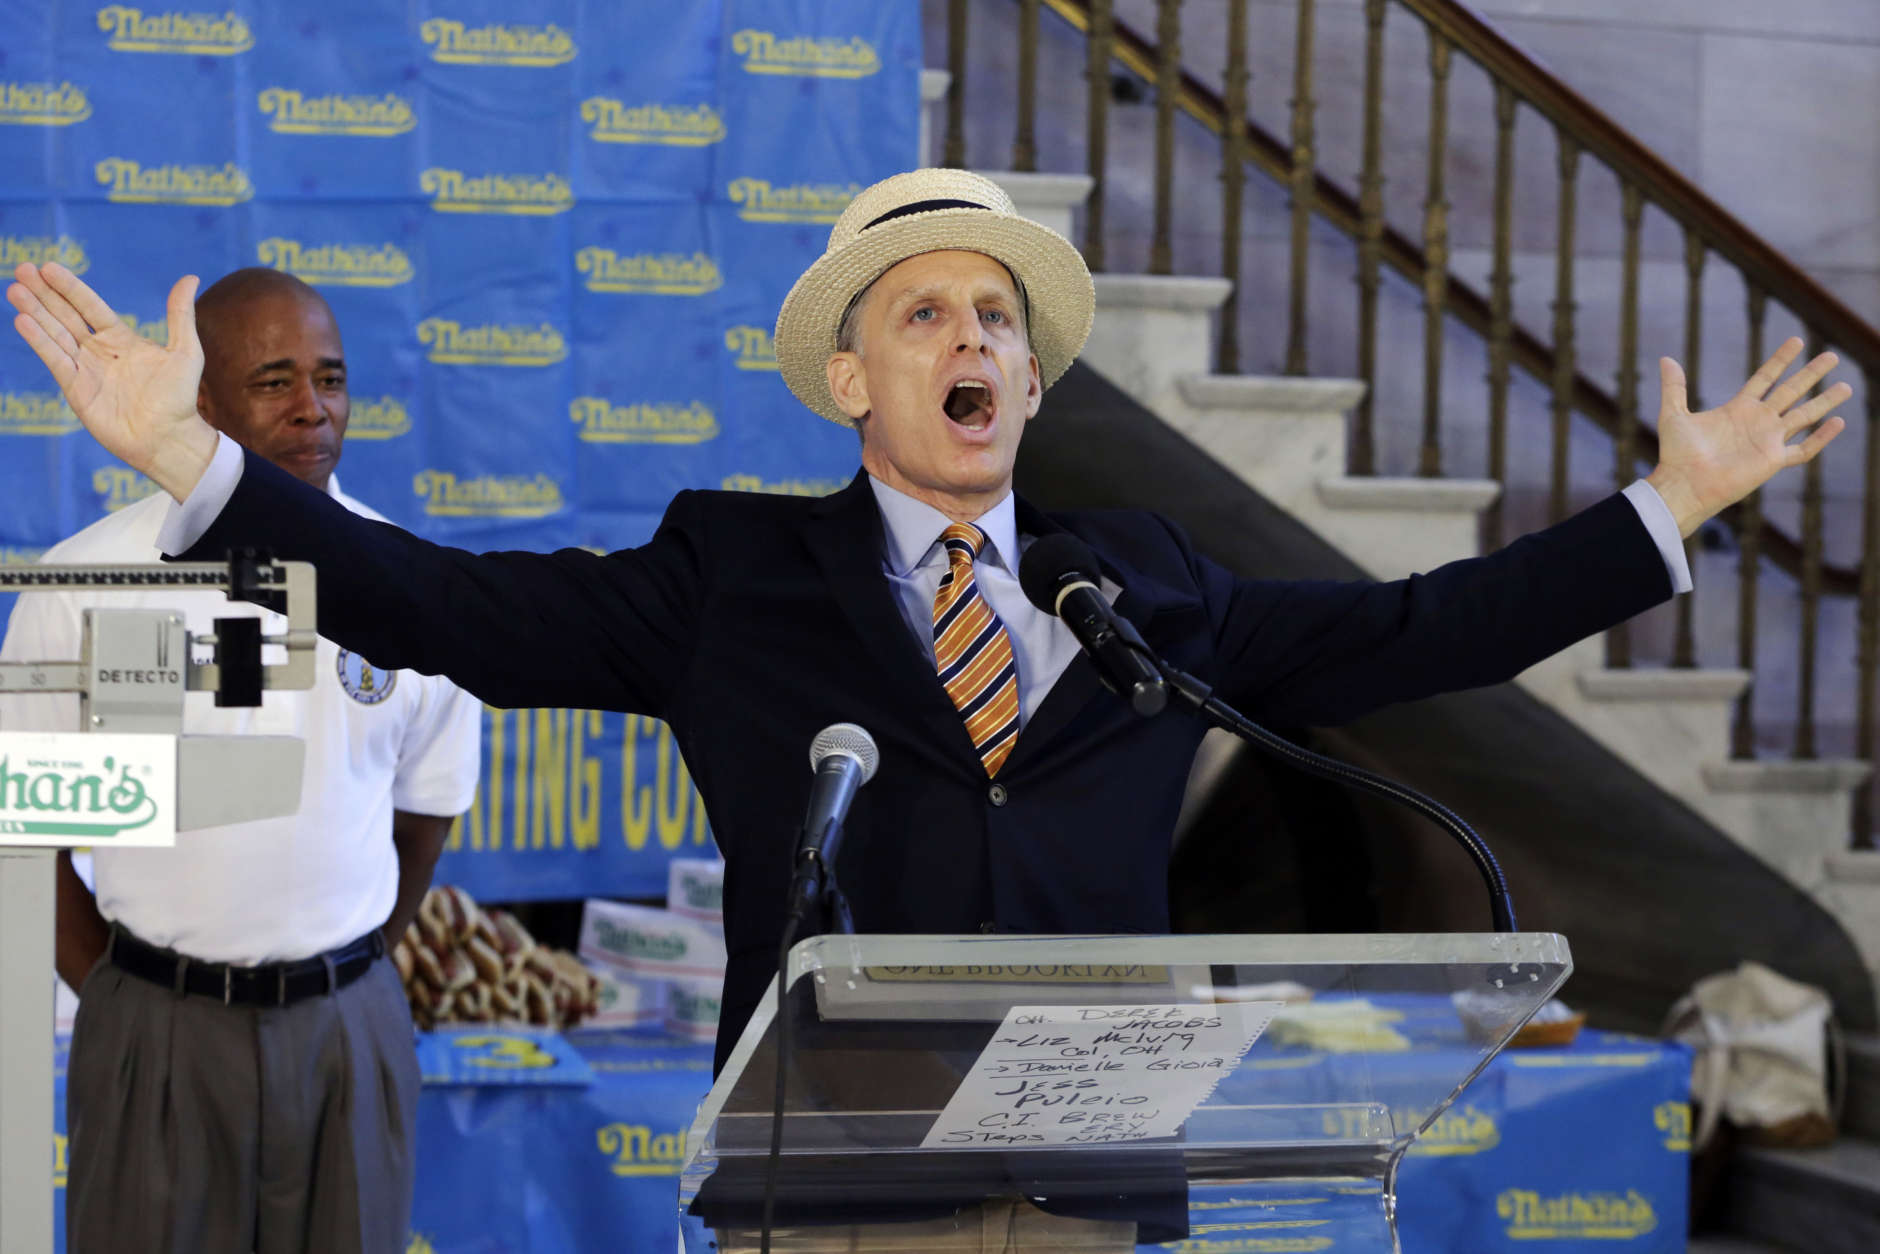 George Shea, master of ceremonies for the Nathan's Hot Dog Eating Contest, gives a sample of his introductions for the event, during the weigh-in for the 2017 contest , in Brooklyn Borough Hall, in New York, Monday, July 3, 2017. At left is Brooklyn Borough President Eric Adams. (AP Photo/Richard Drew)